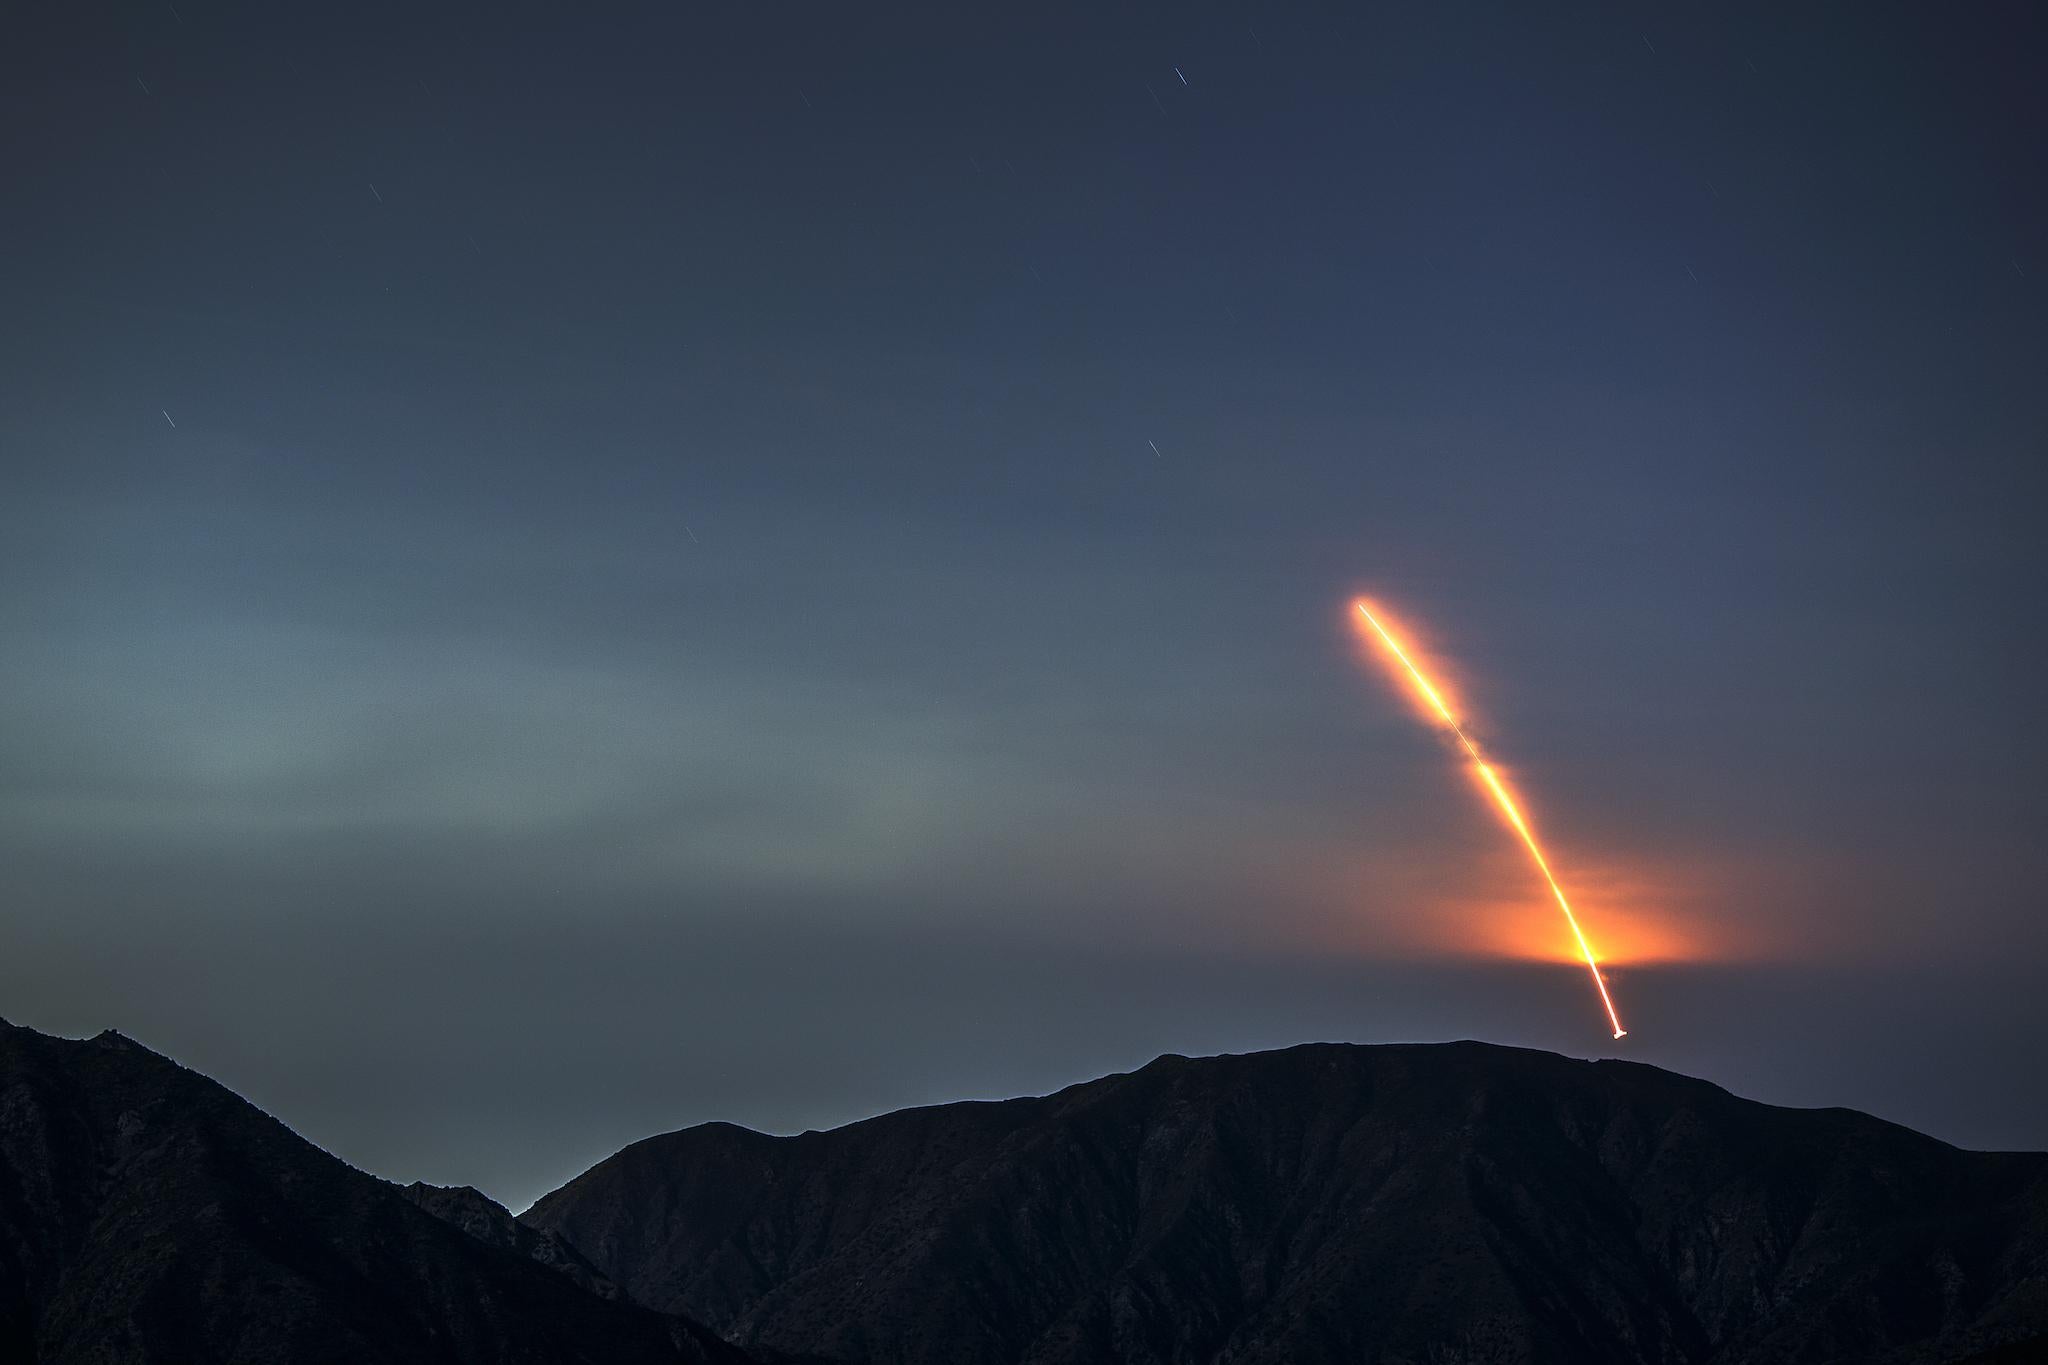 The Atlas 5 rocket carrying the Mars InSight probe launches from Vandenberg Air Force Base, as seen from the San Gabriel Mountains more than 100 miles away, on May 5, 2018 near Los Angeles, California